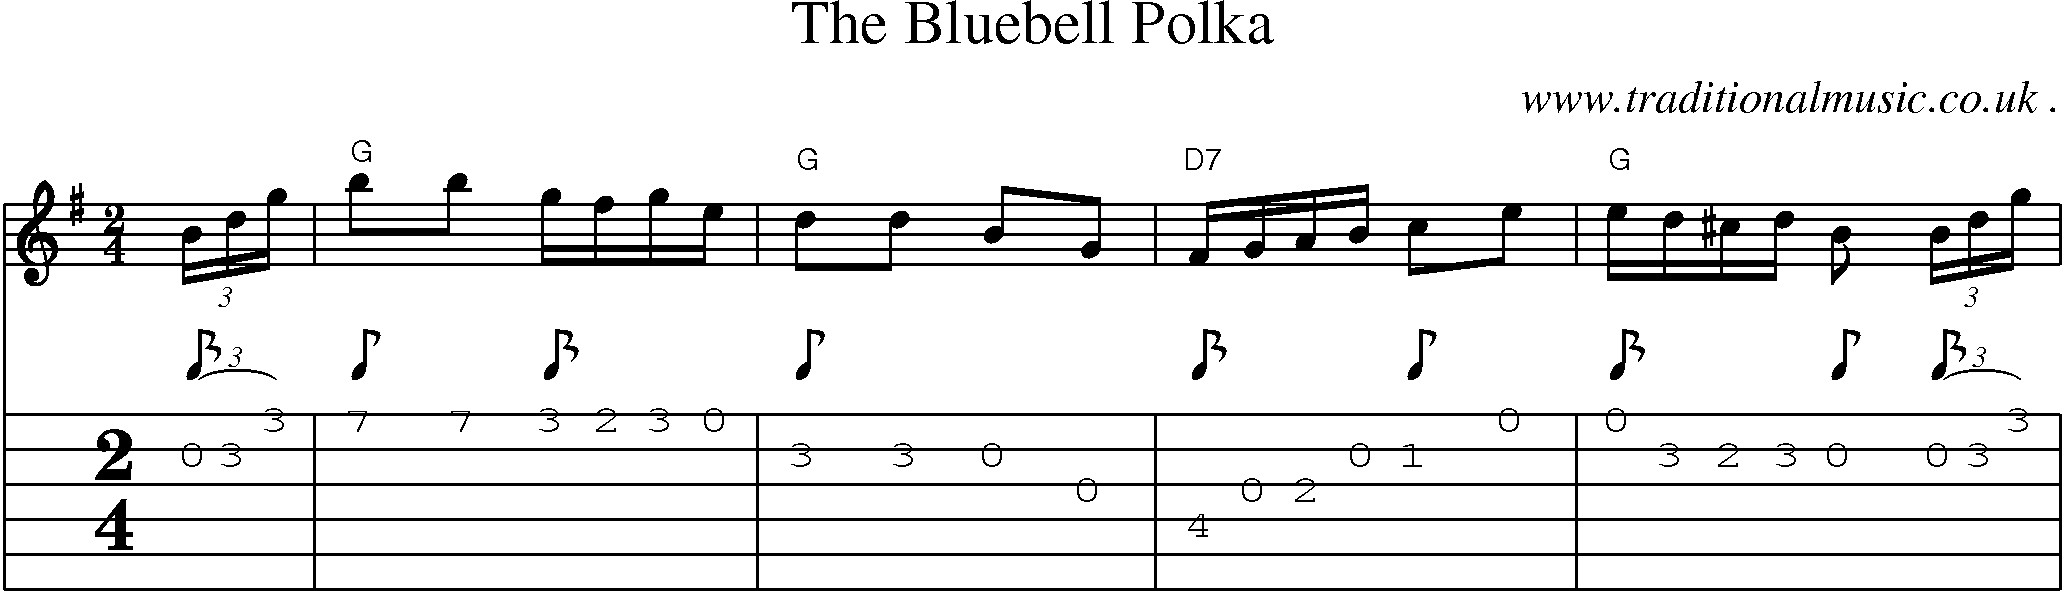 Sheet-music  score, Chords and Guitar Tabs for The Bluebell Polka